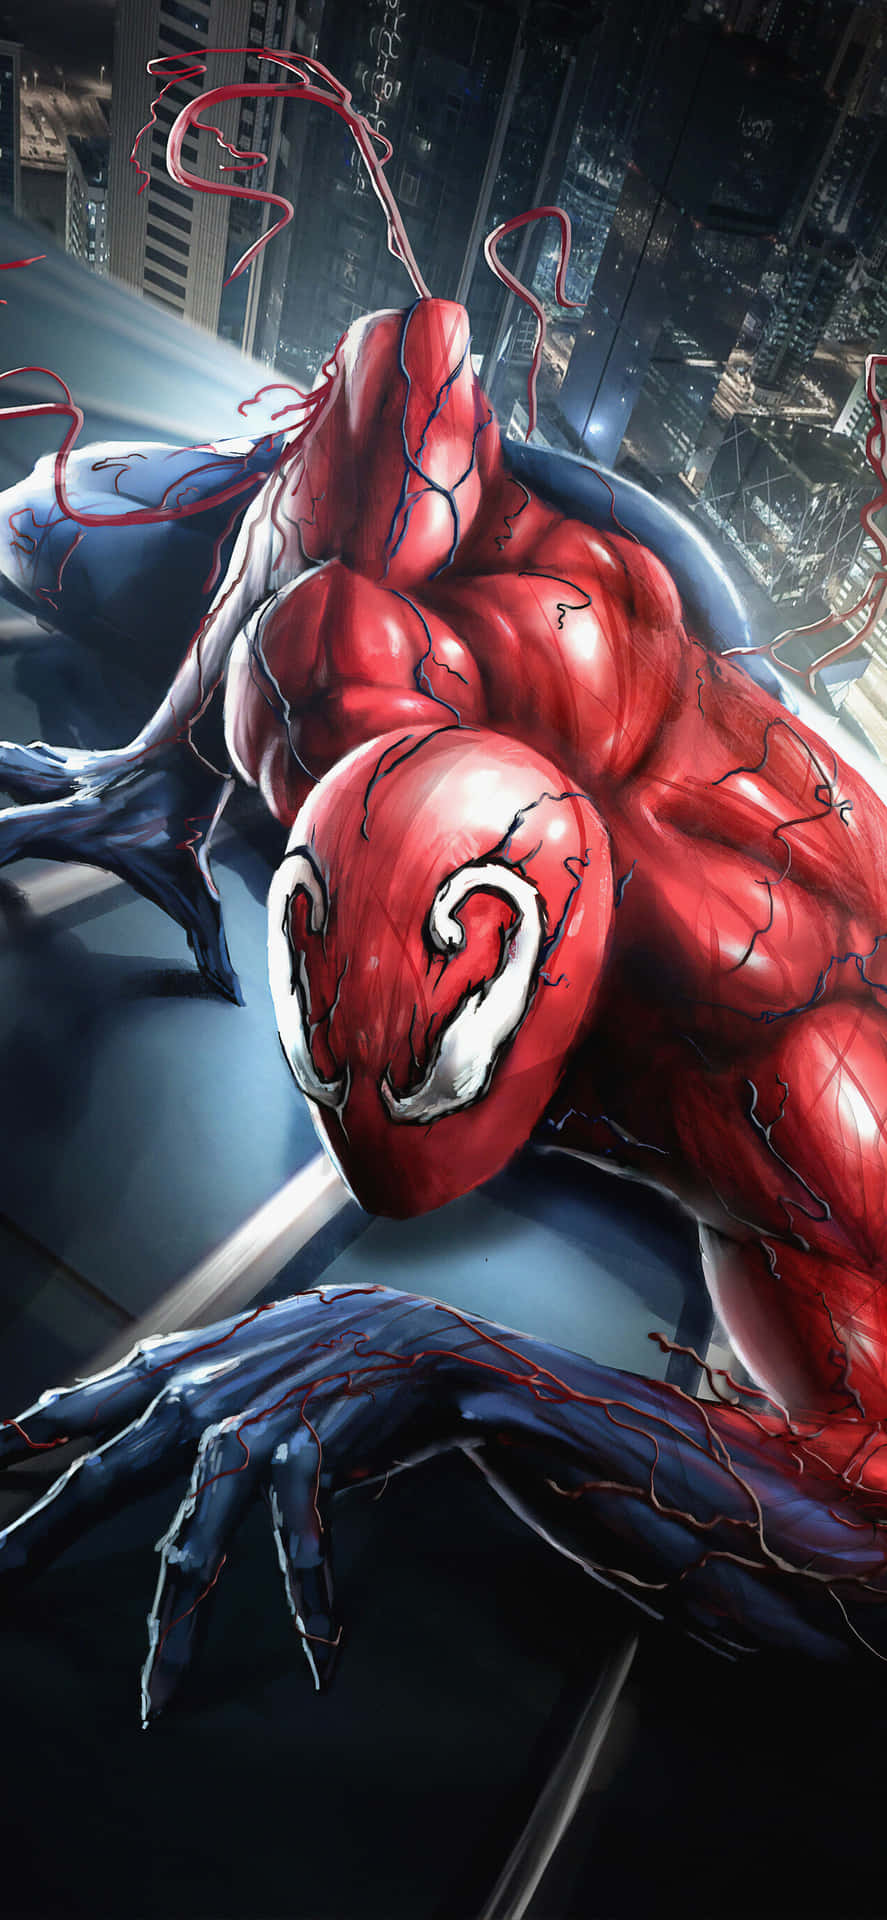 Carnage Takes Hold - Spider Carnage Wallpaper